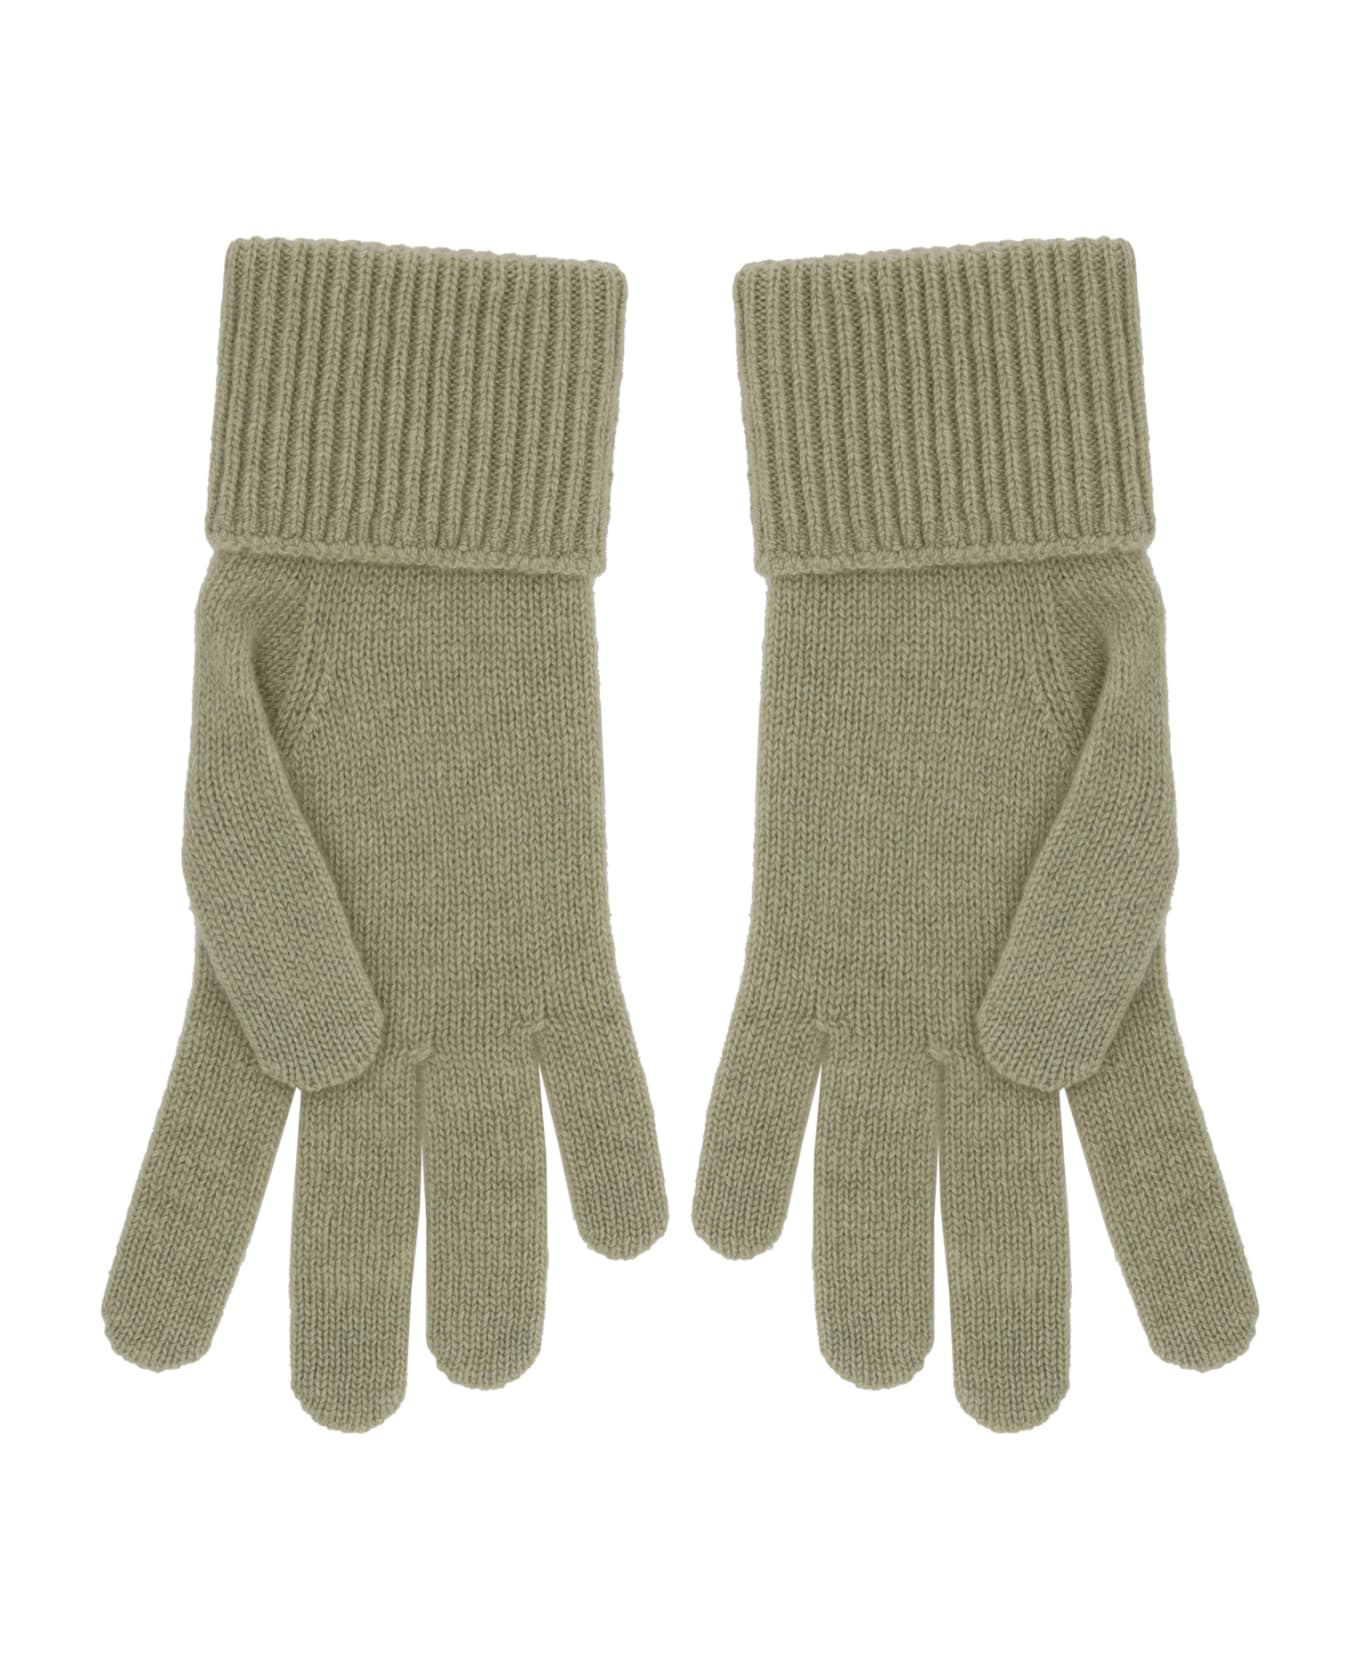 Burberry Gloves - Green name:462